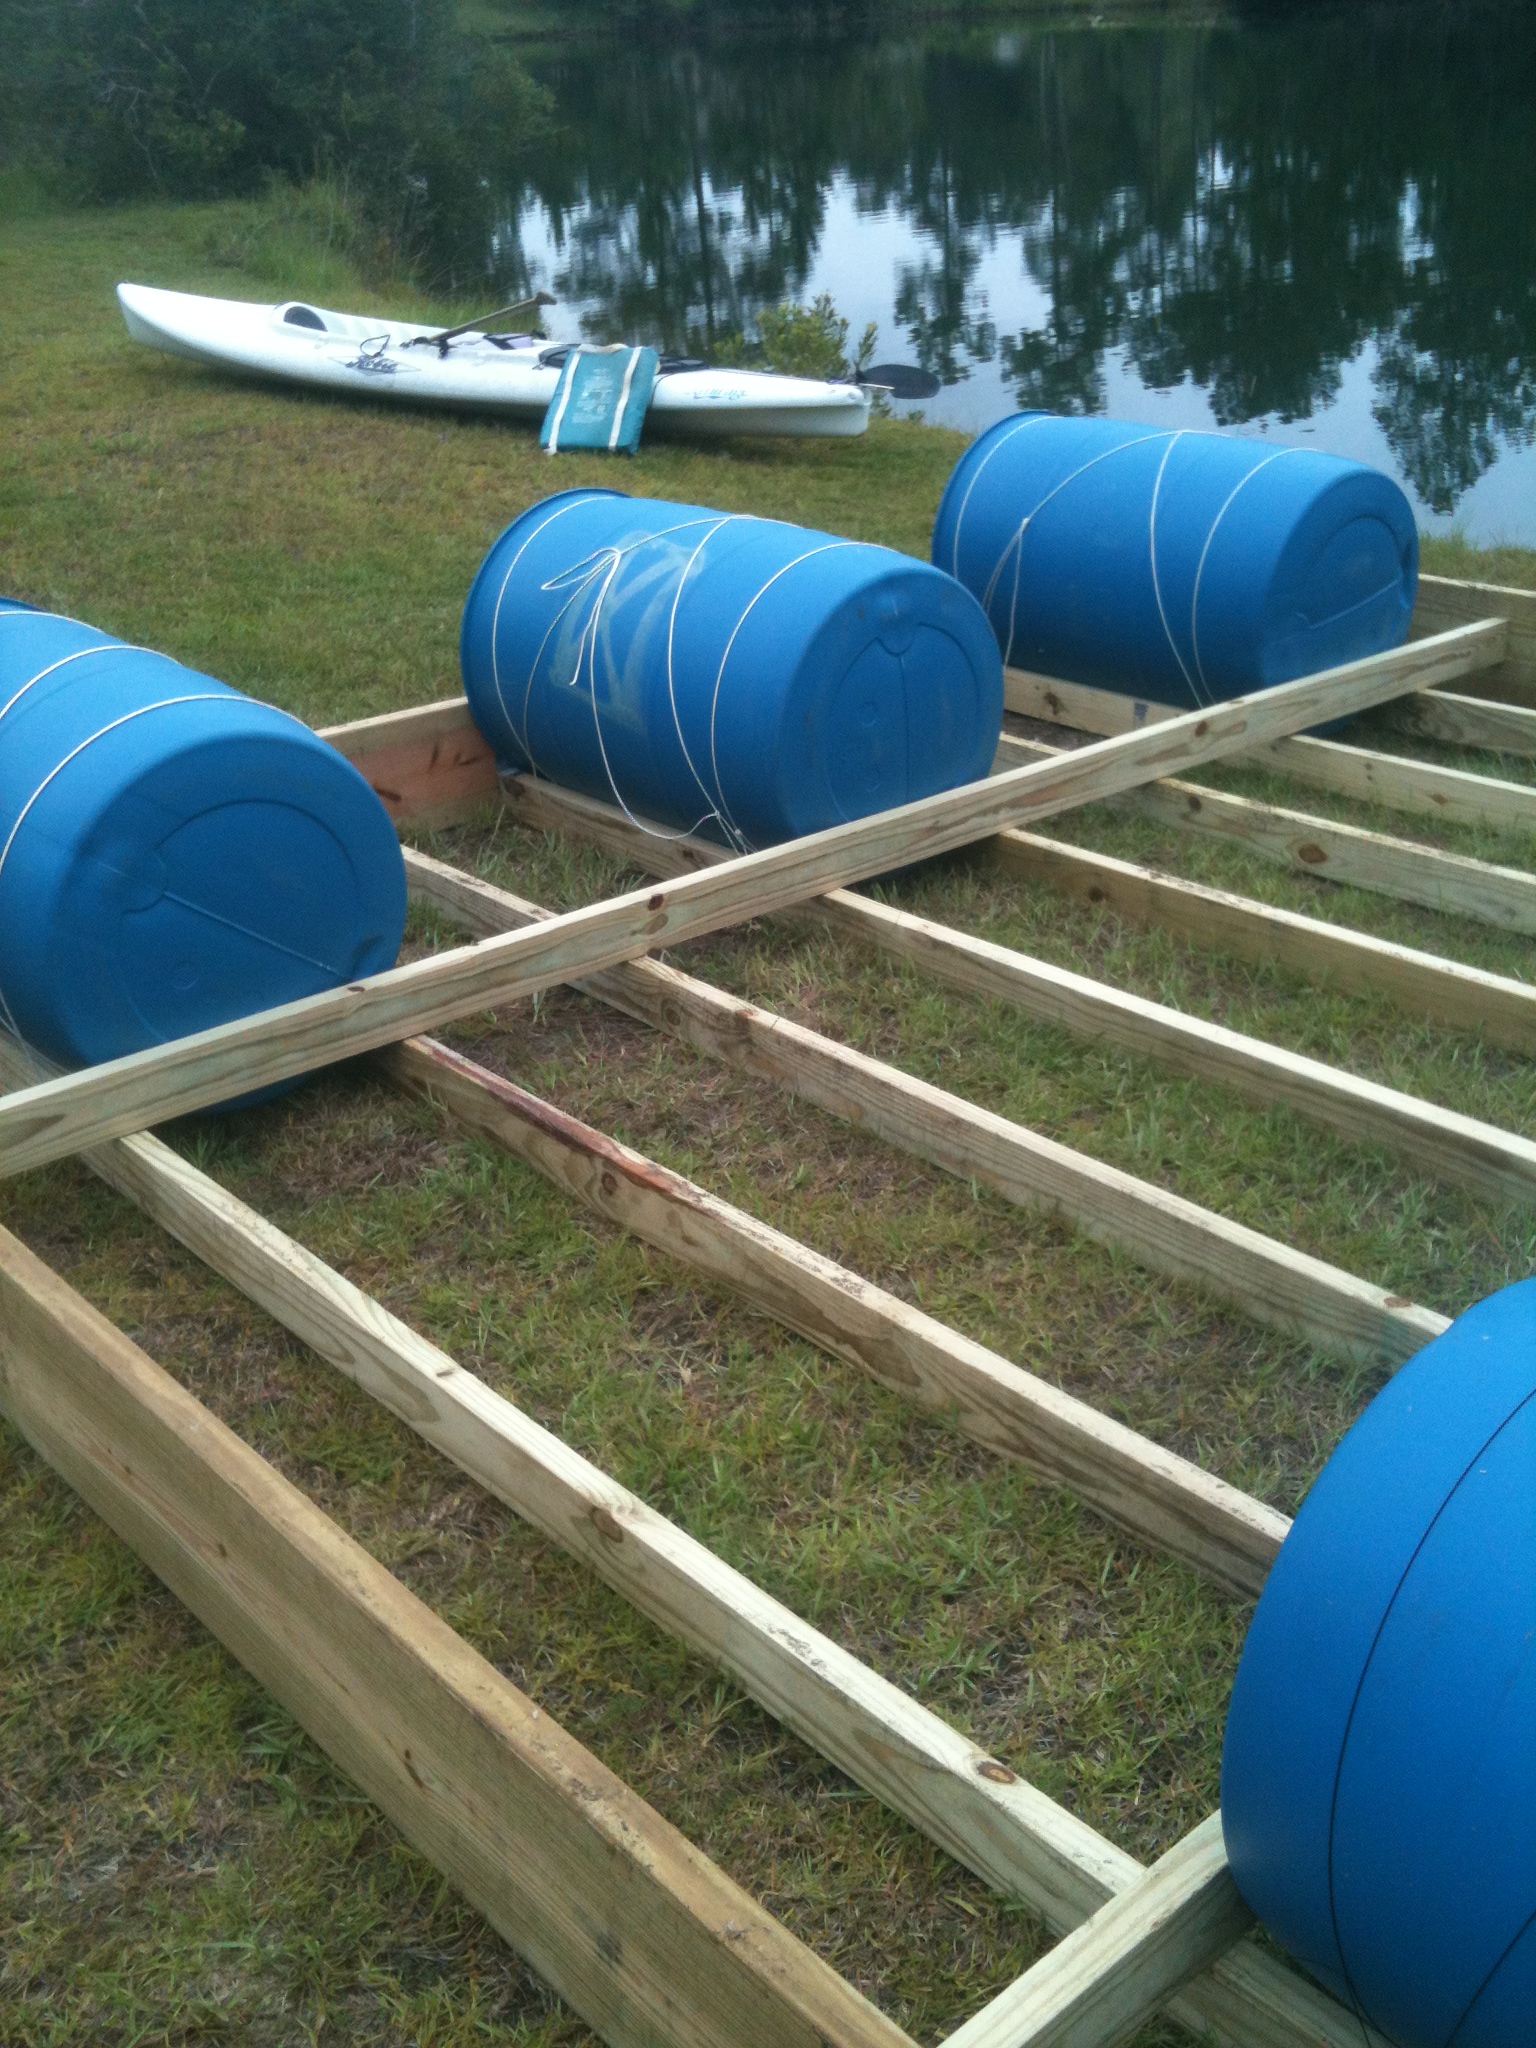 Building A Floating Dock With Barrels Pictures to pin on Pinterest